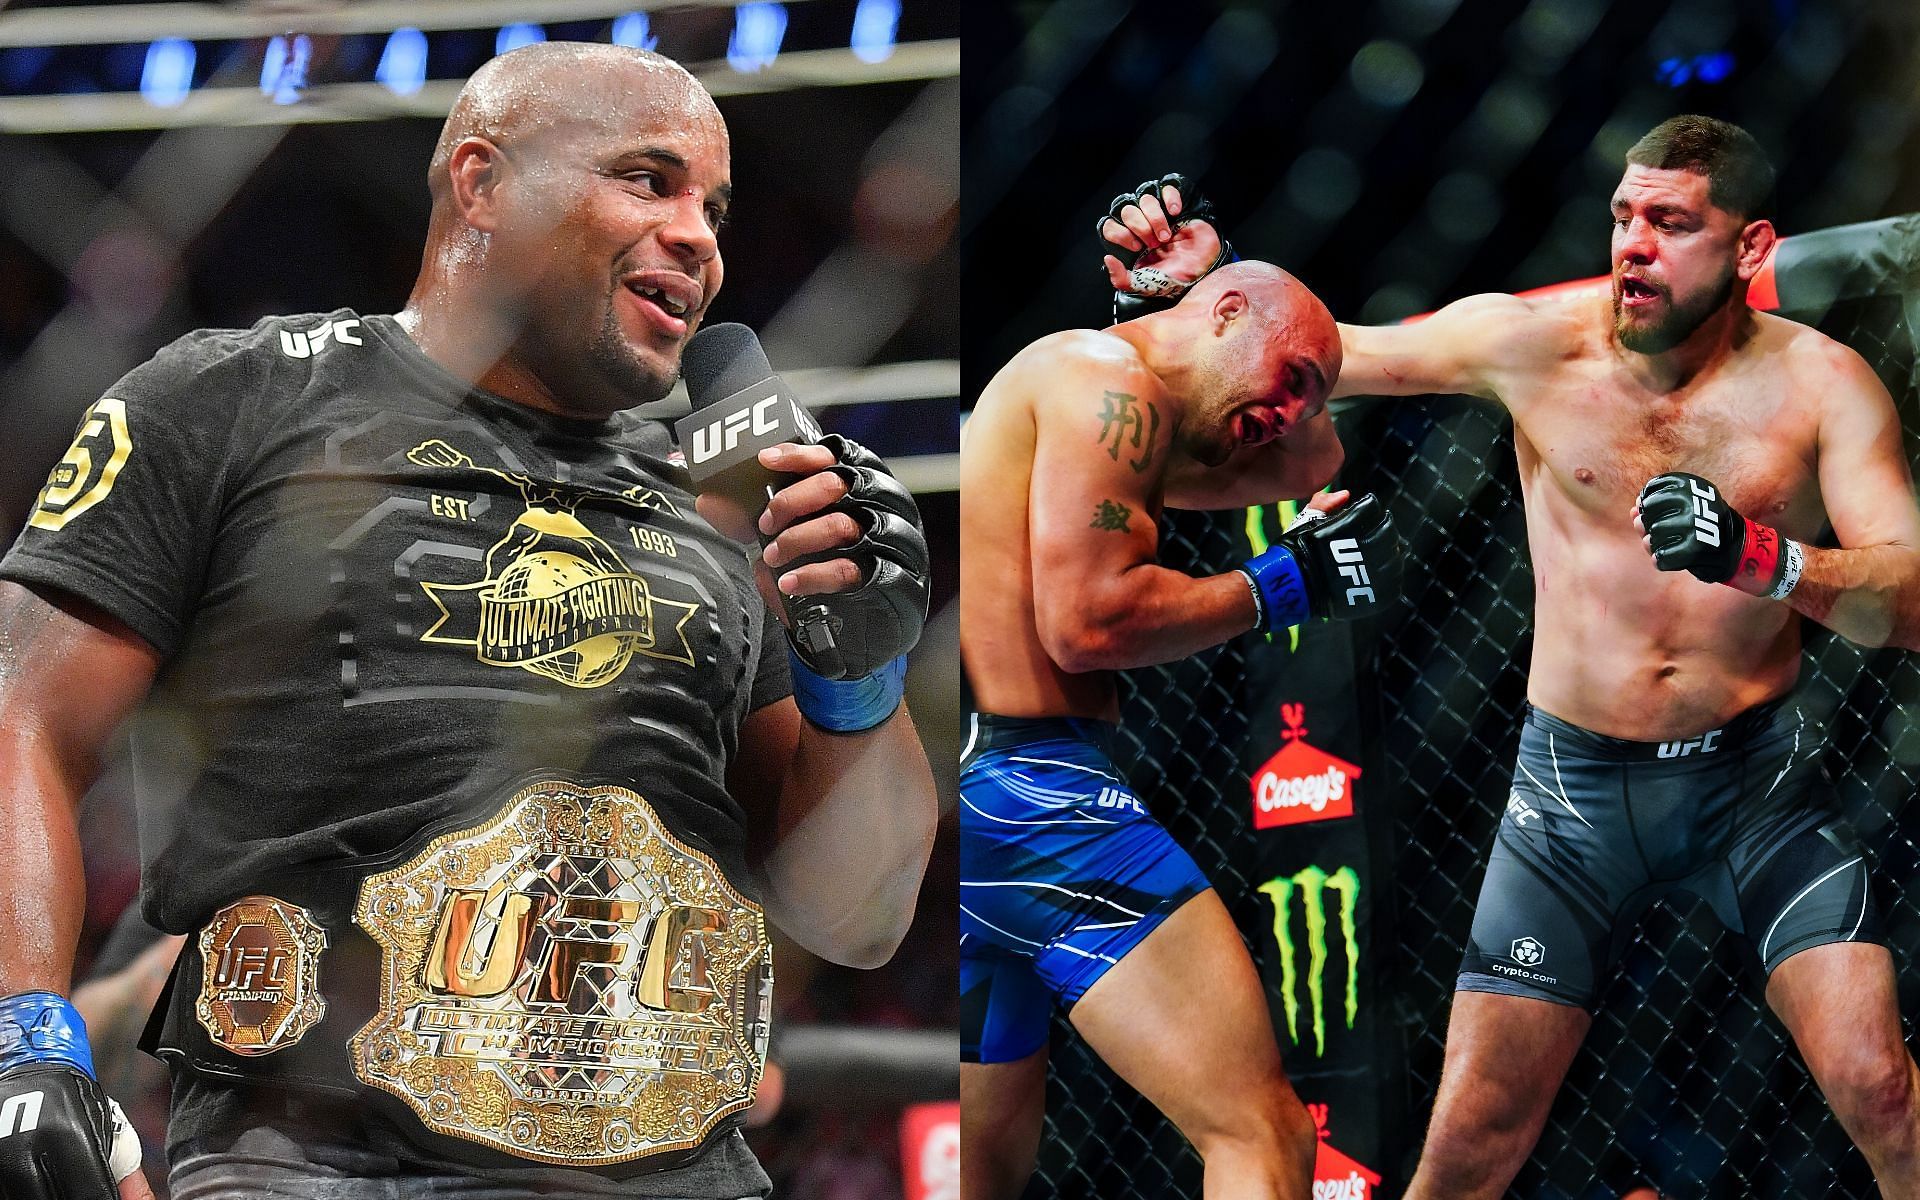 Daniel Cormier (left), Robbie Lawler (center), and Nick Diaz (right) (Images via Getty)